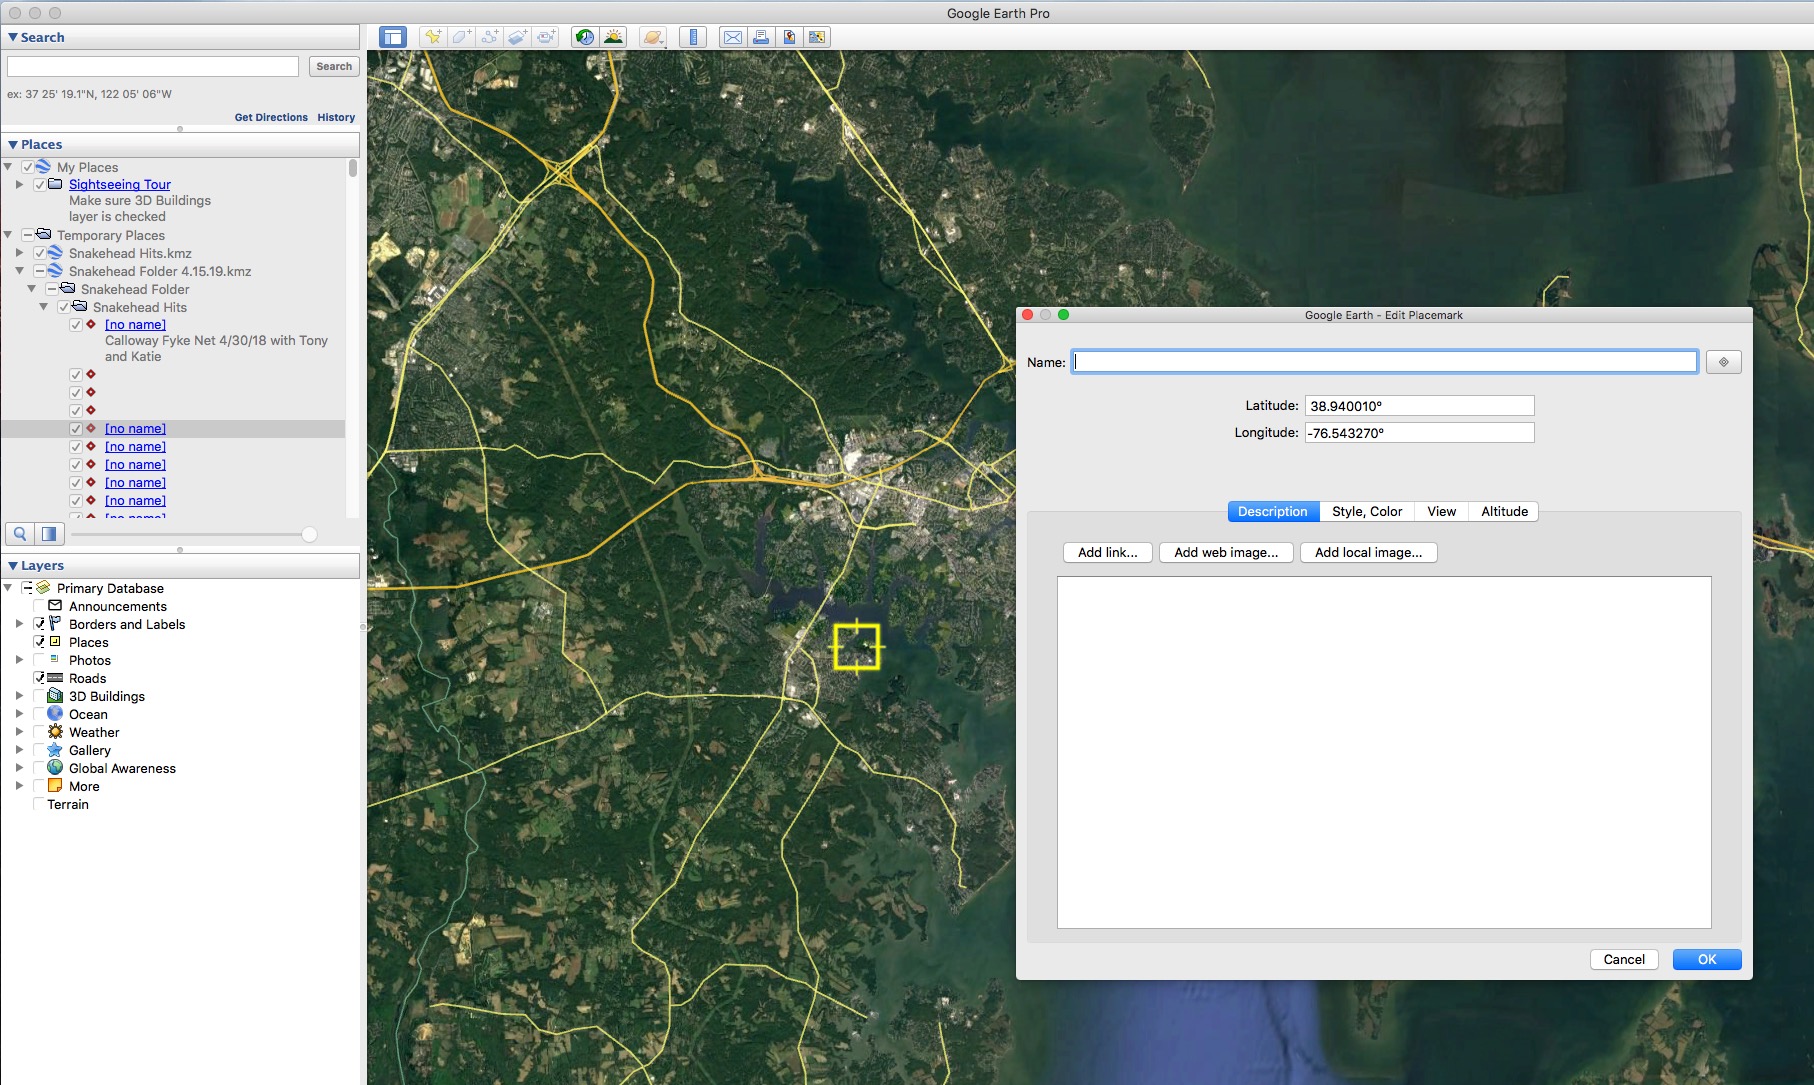 how can i get smoother fly ins on google earth pro for mac